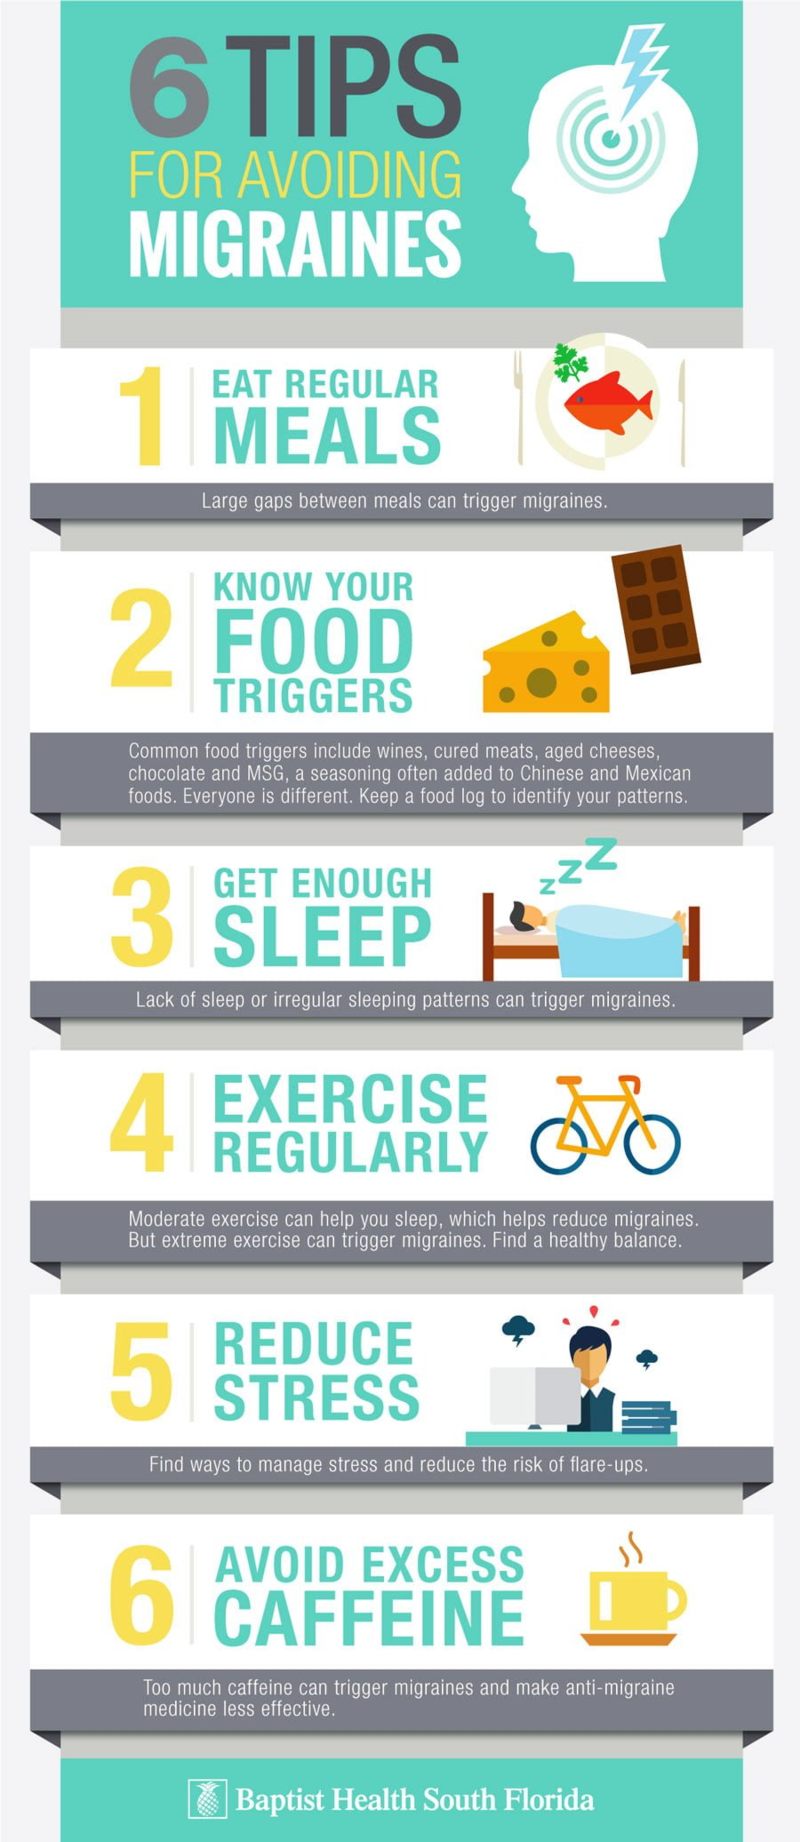 6 Tips for Avoiding Migraines Infographic